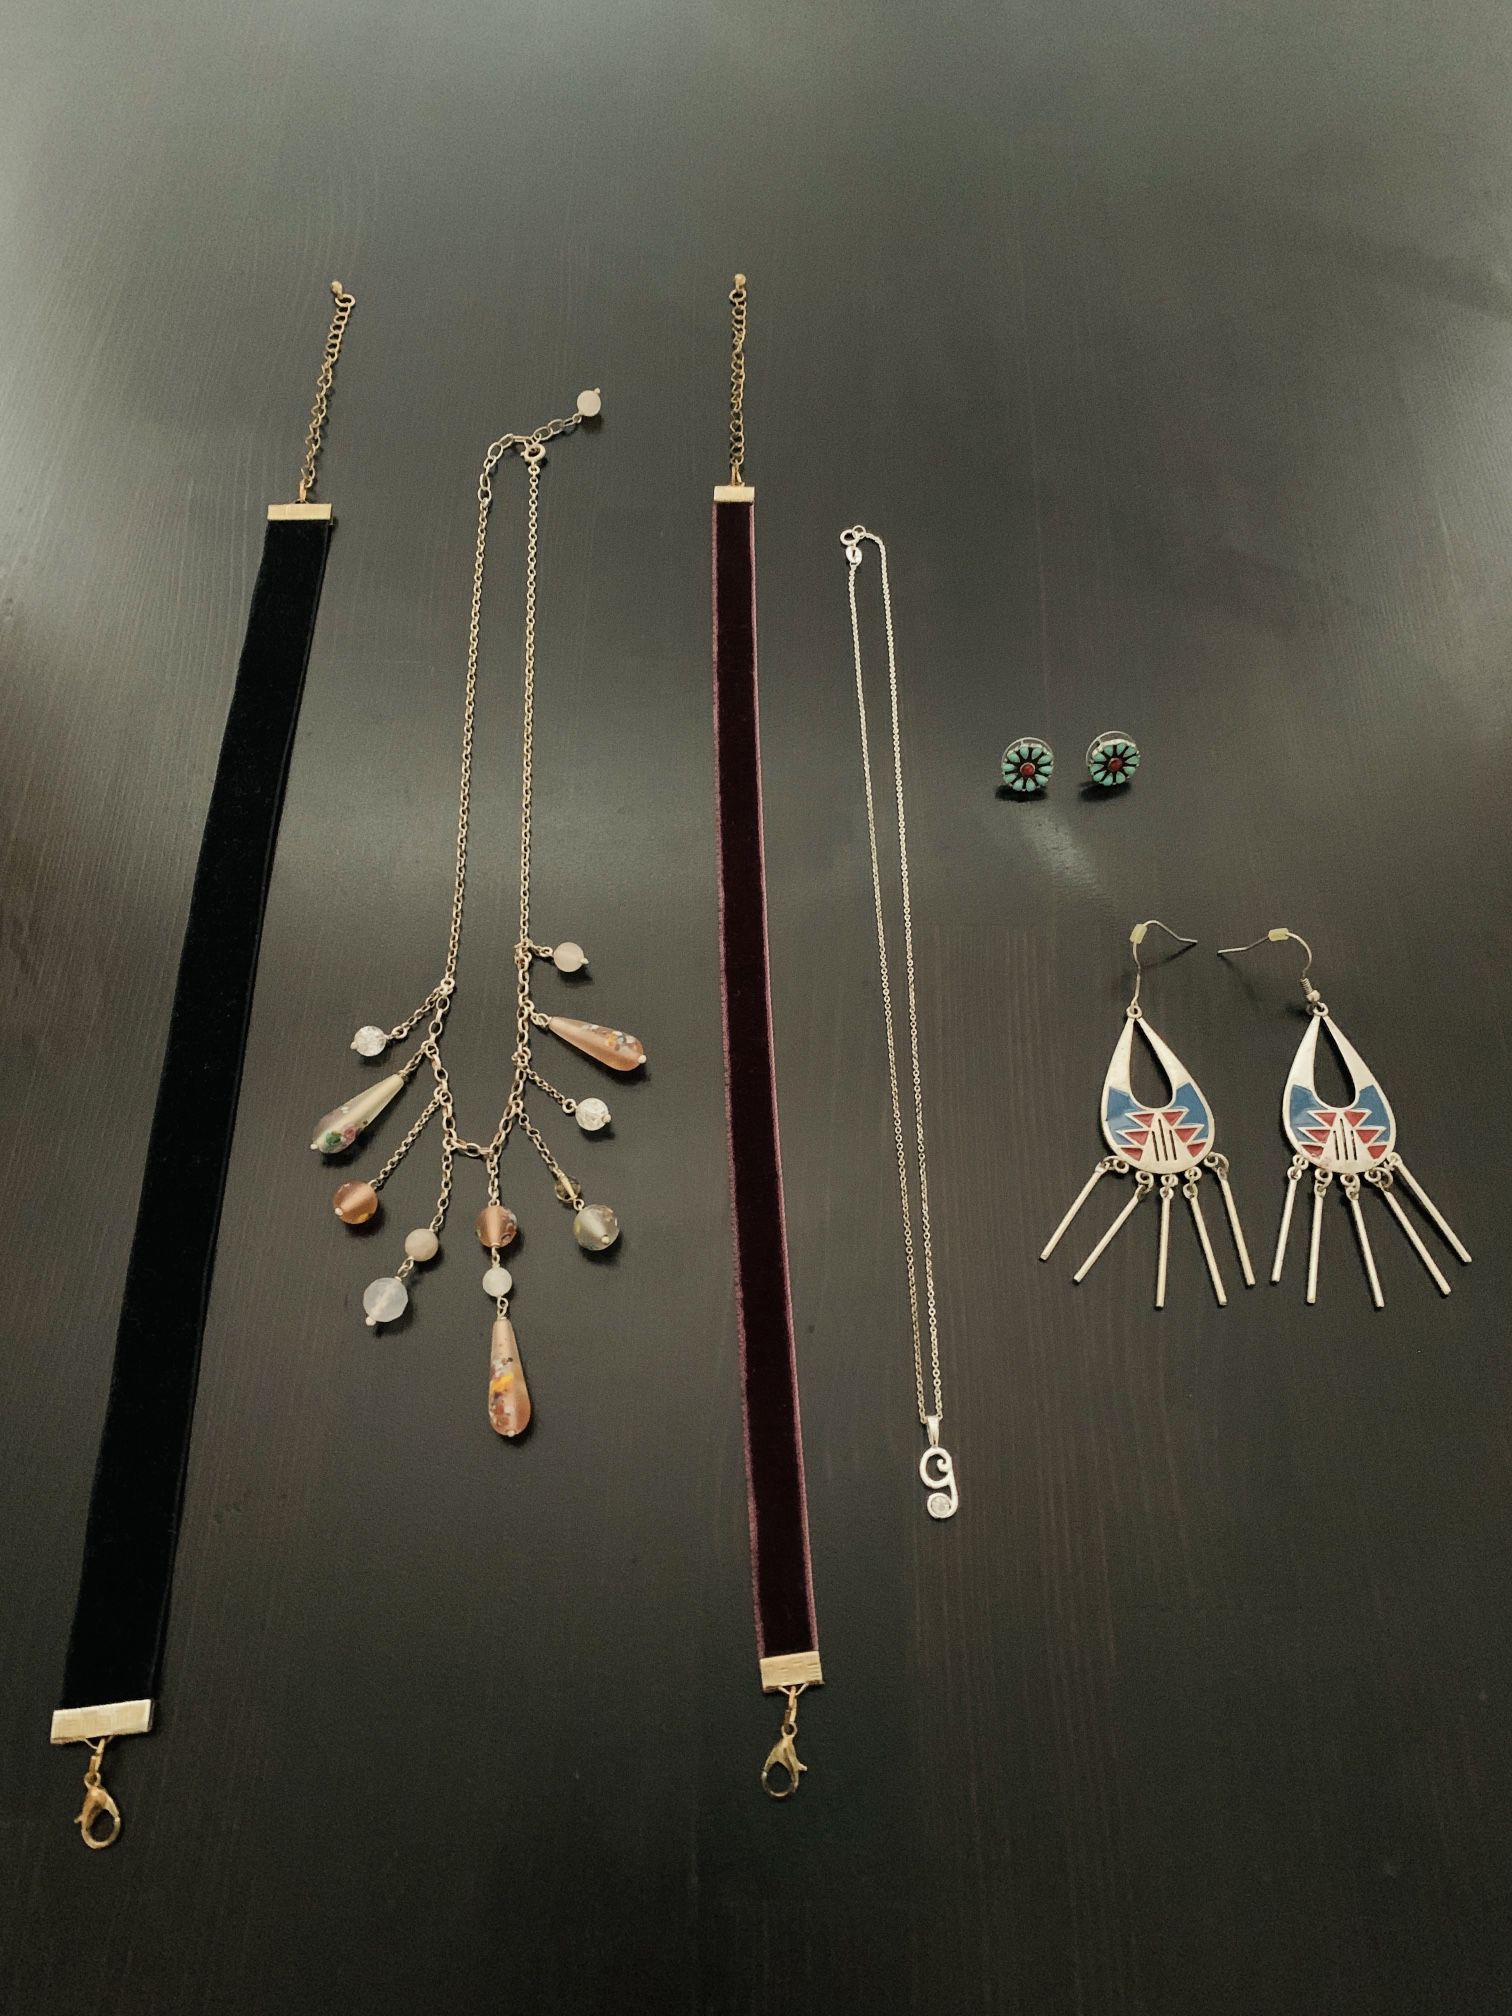 4 Necklaces & 2 Earrings for $6 TOTAL